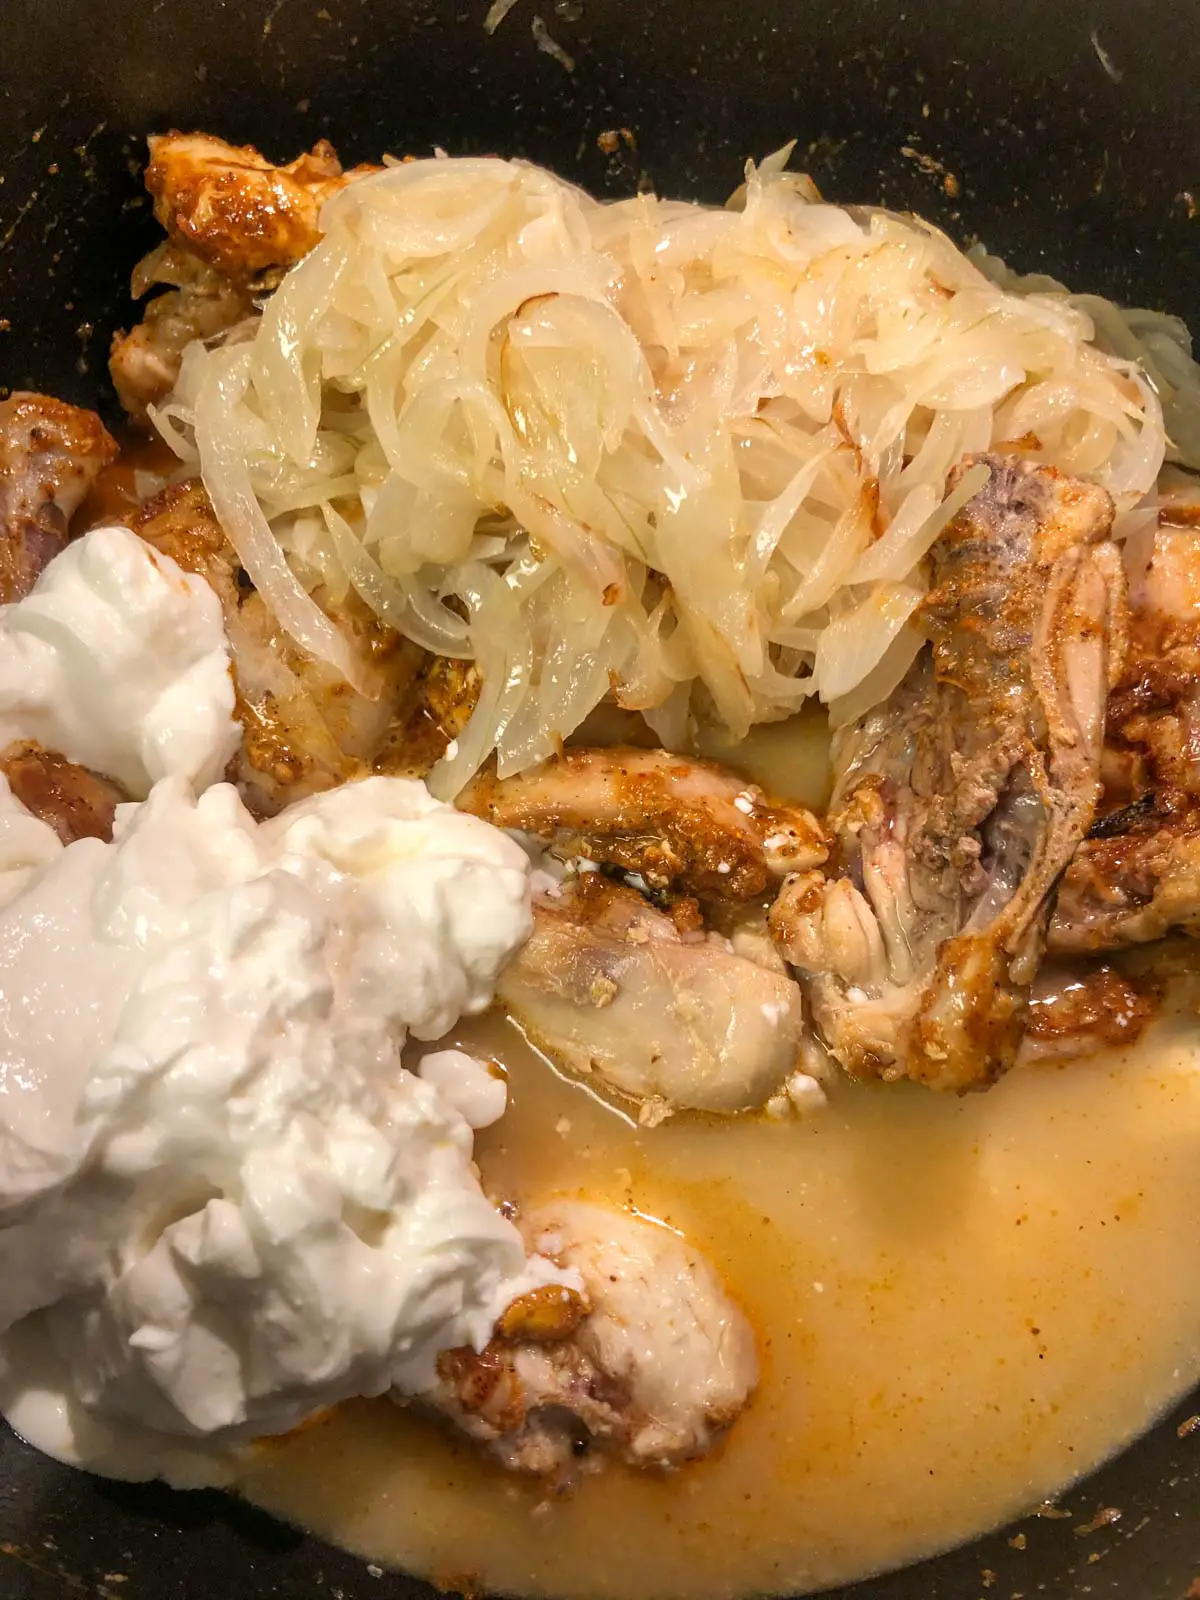 Chicken pieces with sliced cooked onions chicken broth and yogurt